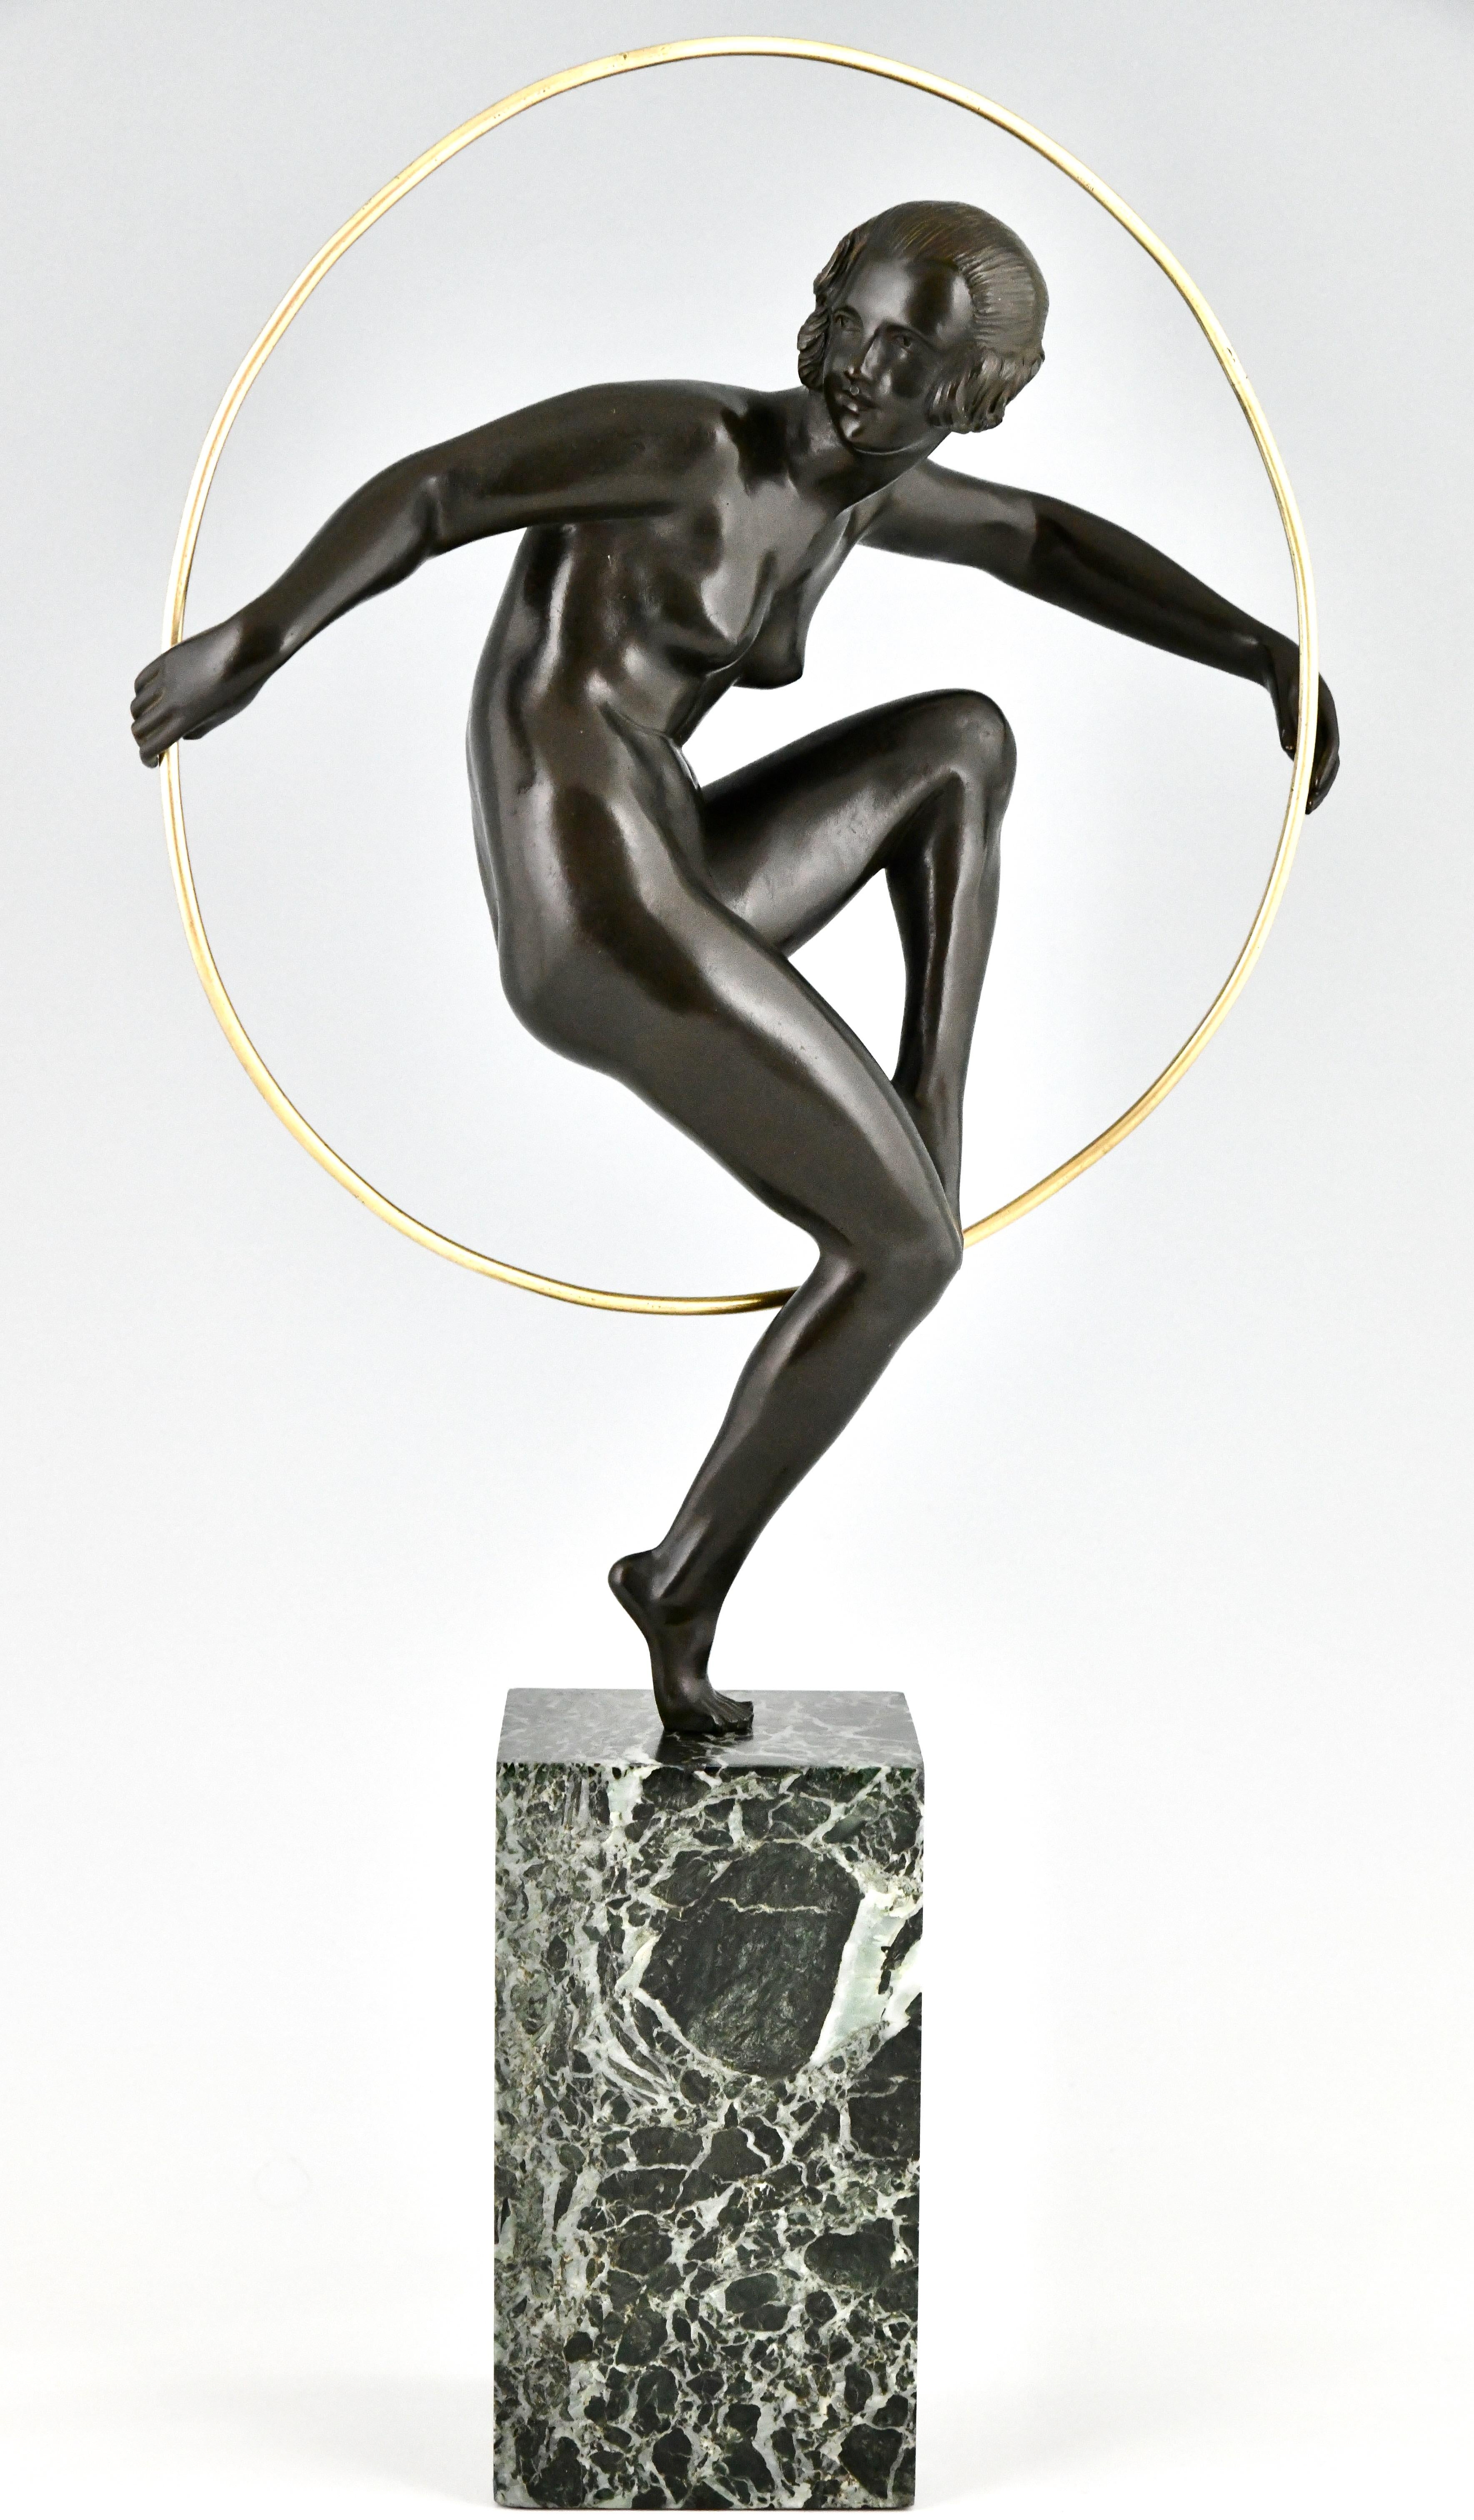 Art Deco bronze nude hoop dancer by Marcel André Bouraine. 
Bronze with green patina on a green marble base. 
France ca. 1930.
This bronze illustrated on page 44 of the book
Art Deco and other figures, Brian Catley.